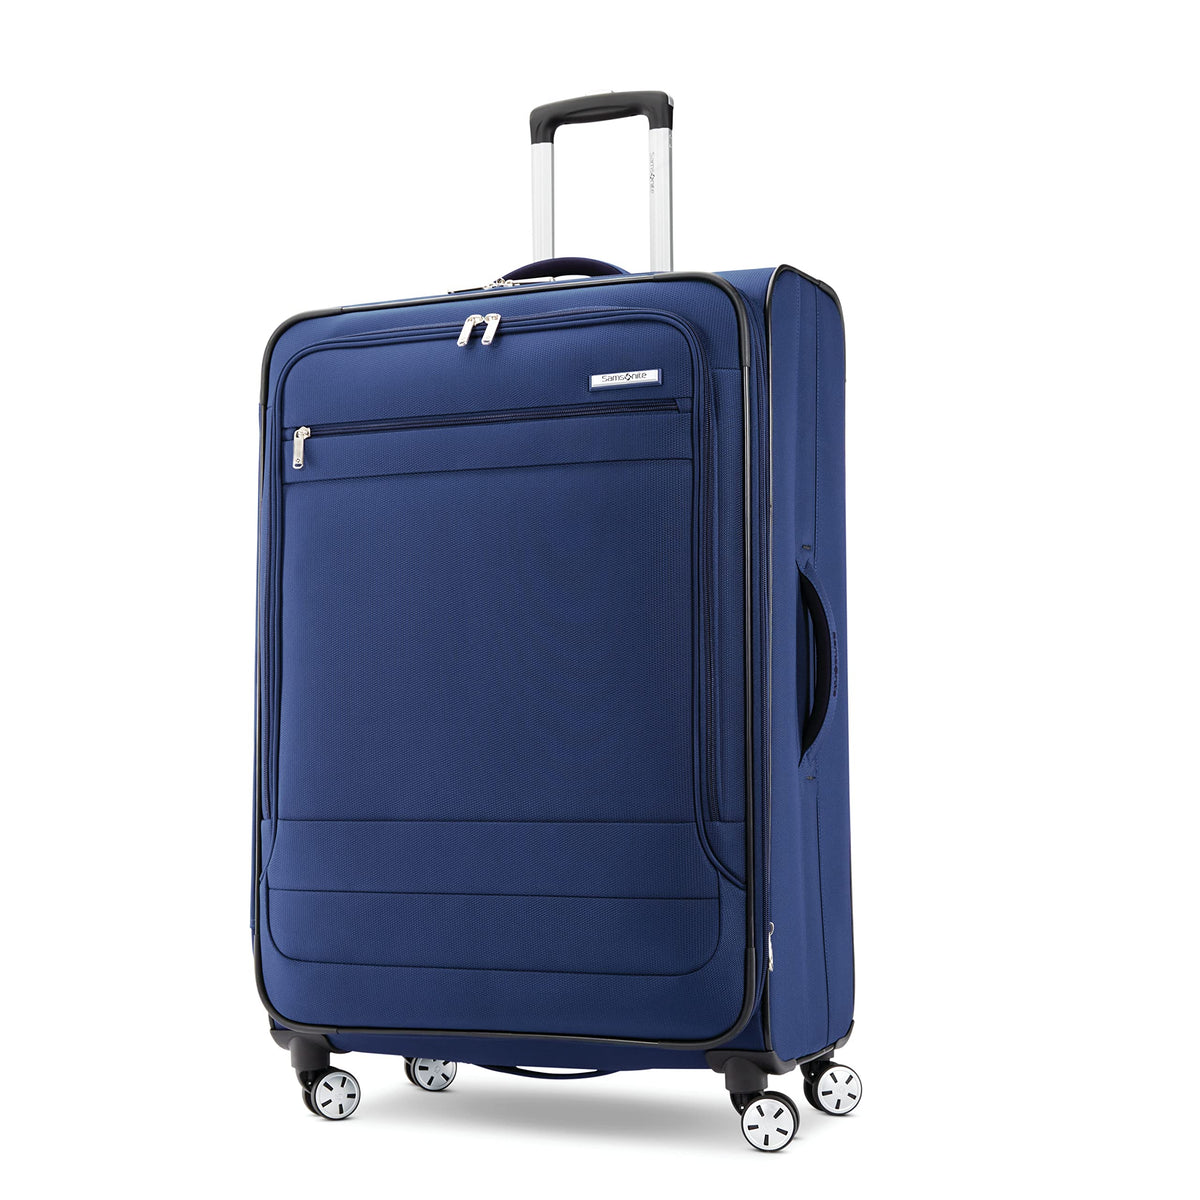 Samsonite Aspire DLX Softside Expandable Luggage with Spinner Wheels, Black, Carry-On 20-Inch U1